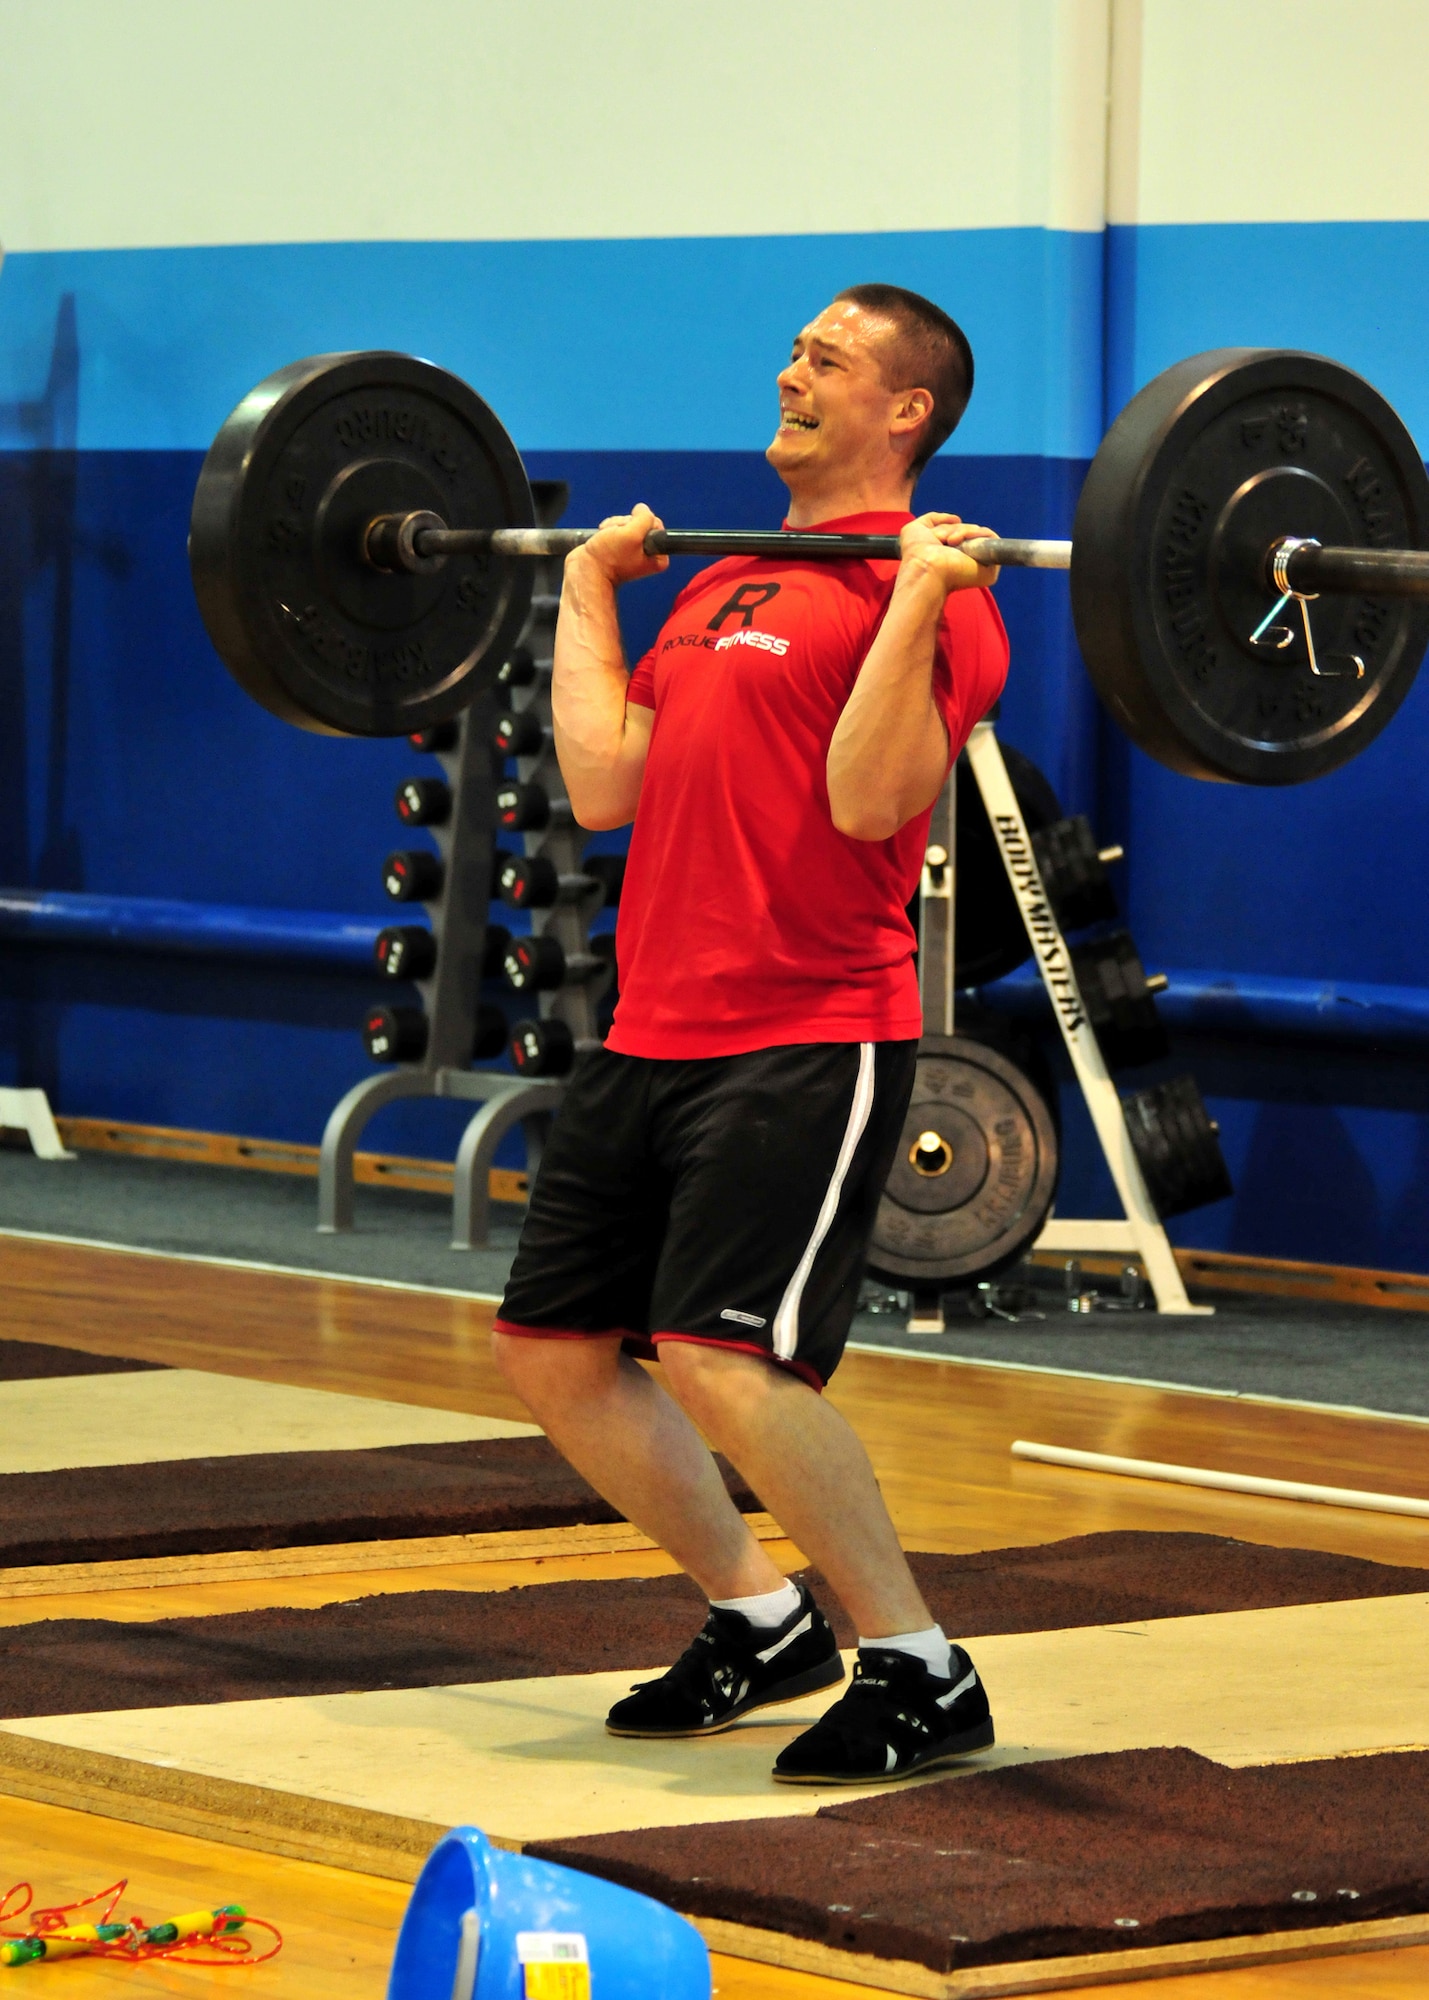 U.S. Air Force Capt. Jeremiah Buckenberger, 68th Civil Engineer Squadron chief of integration performs a weight lifting movement as part of his CrossFit workout of the day at the Ramstein Air Base North Side Gym, Aug. 28, 2009.(U.S. Air Force photo by Staff Sgt. Markus Maier)